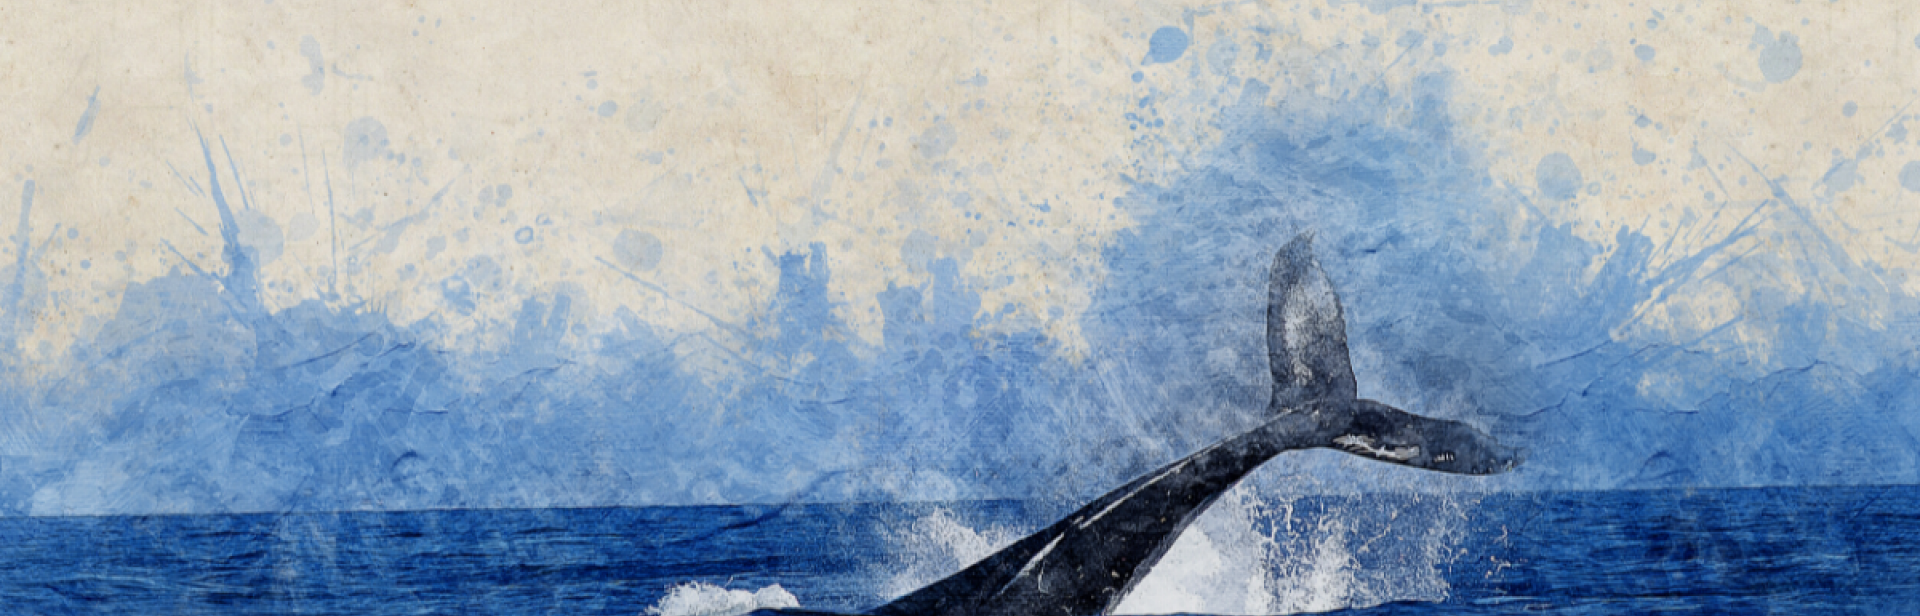 illustration of whale in ocean